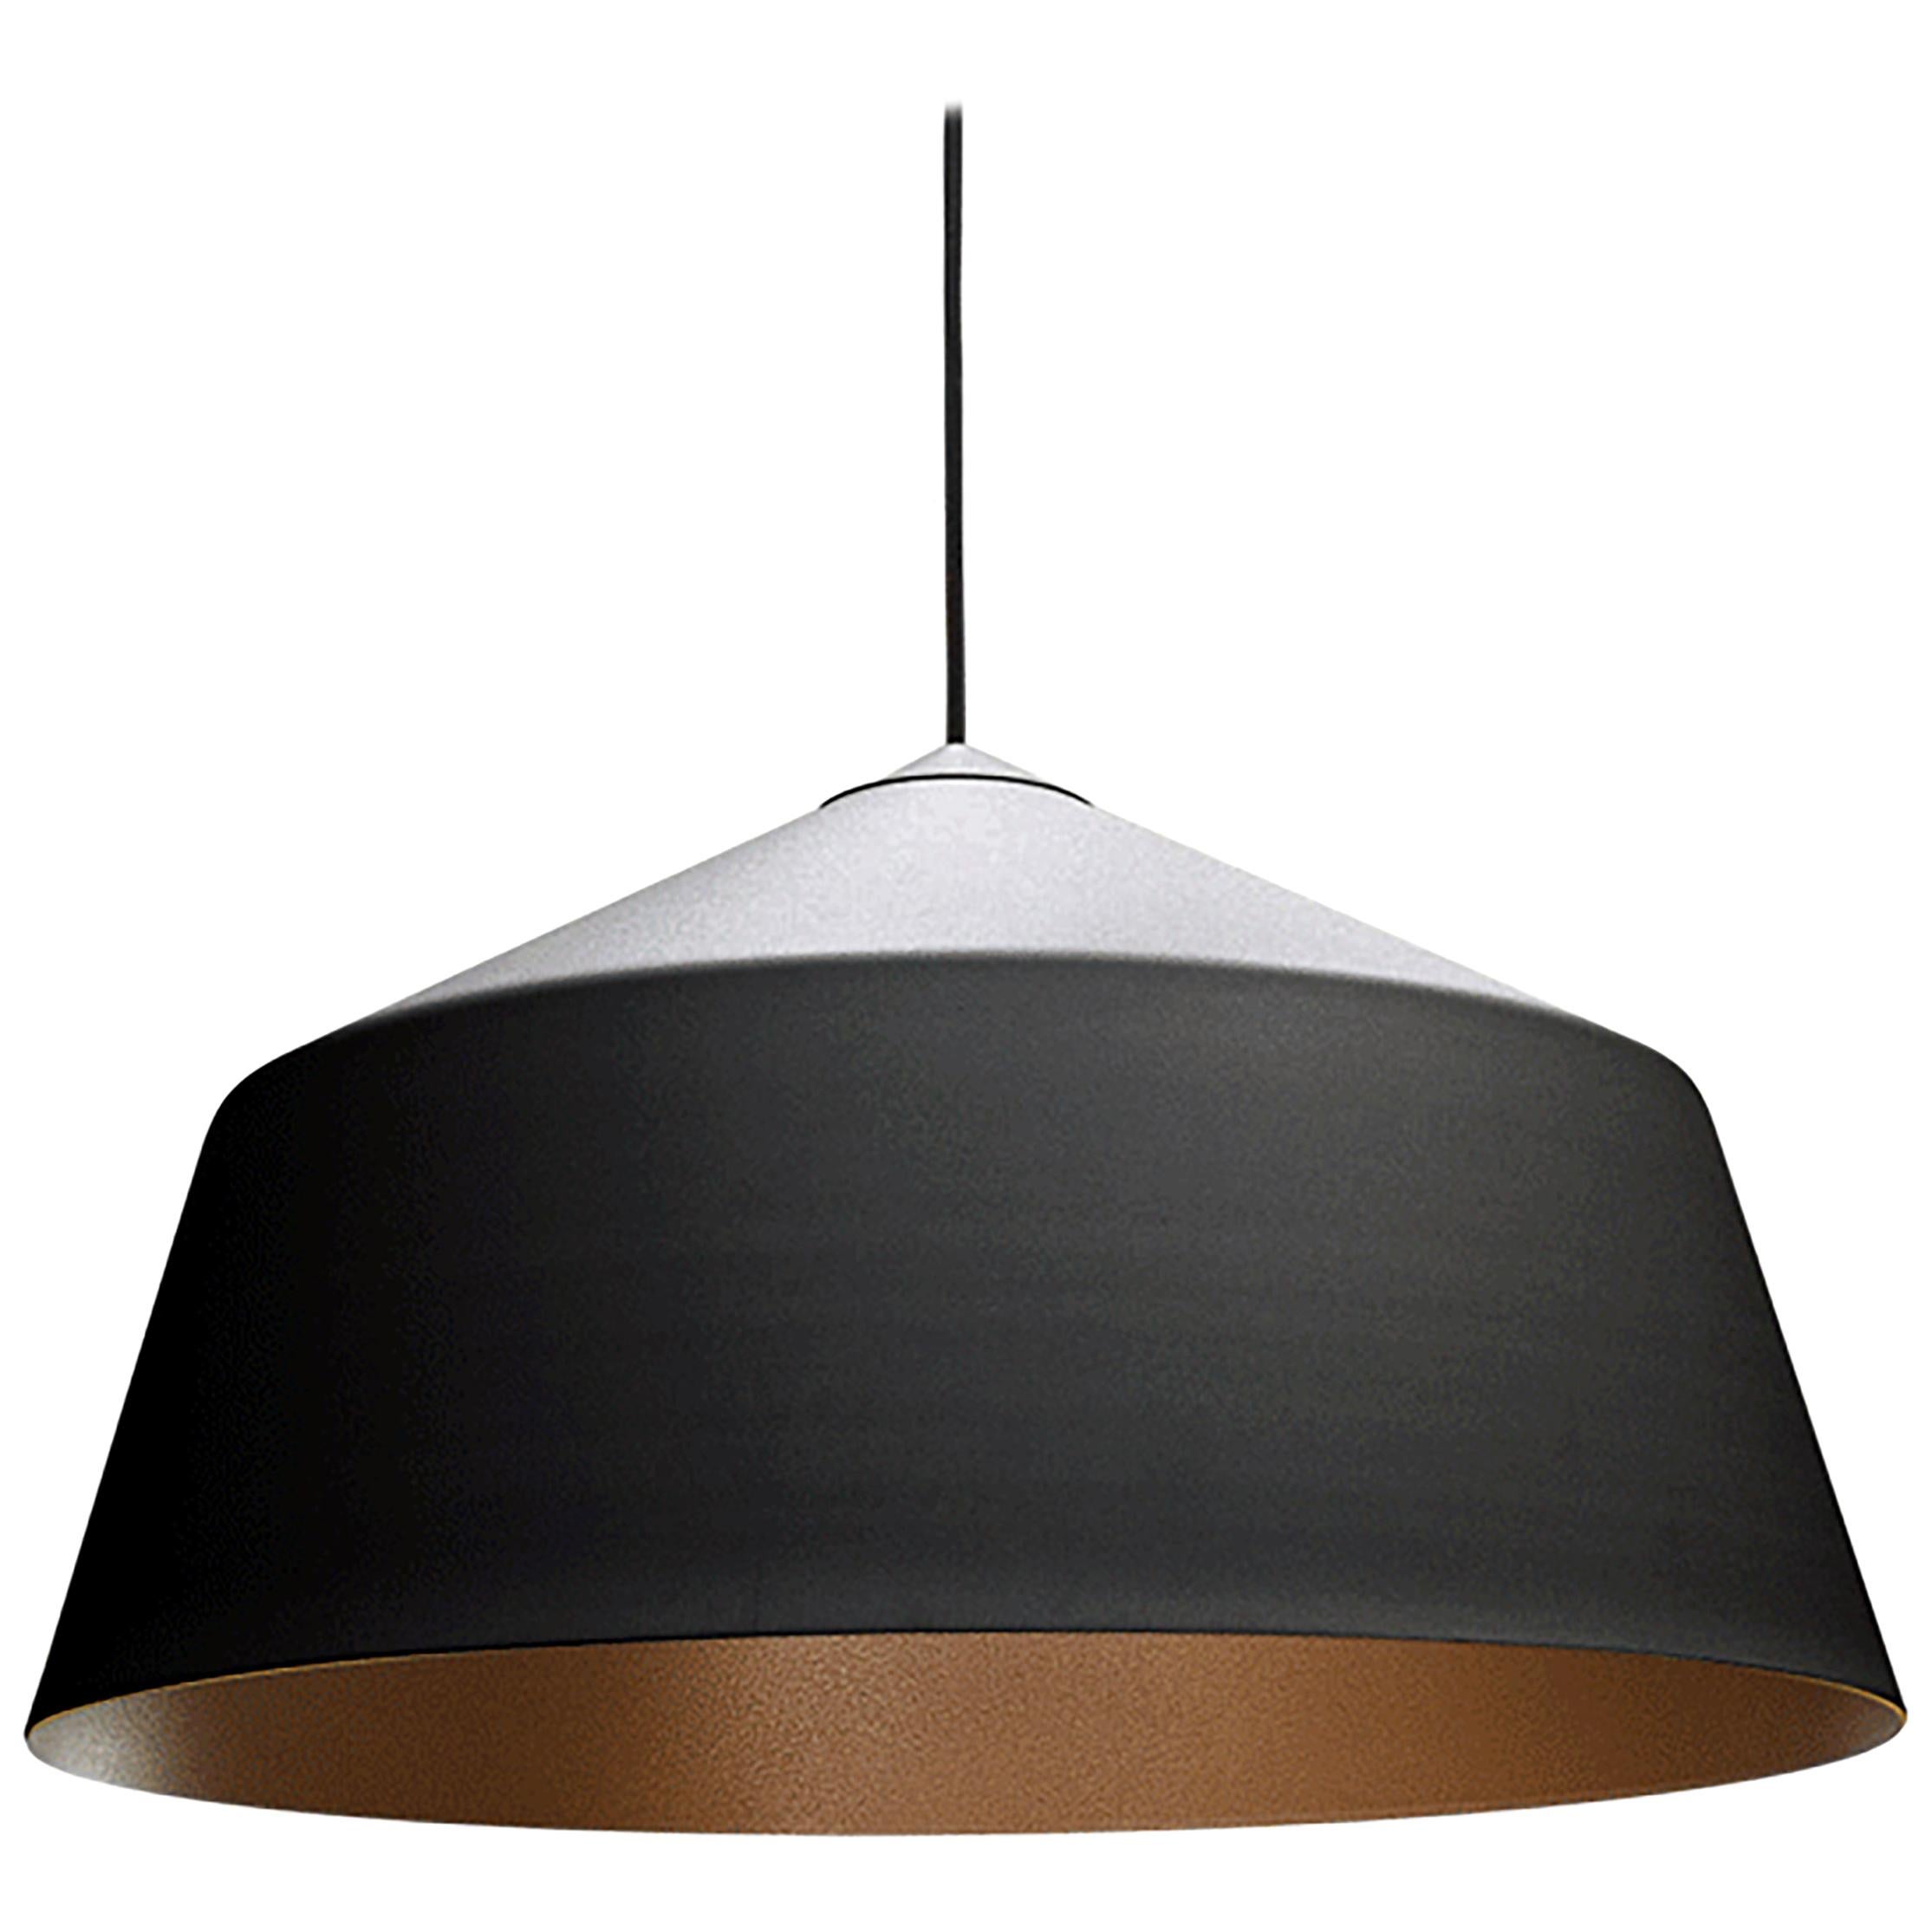 Circus Pendant Light Design By Corinna Warm For Warm Large Black/Bronze In Stock